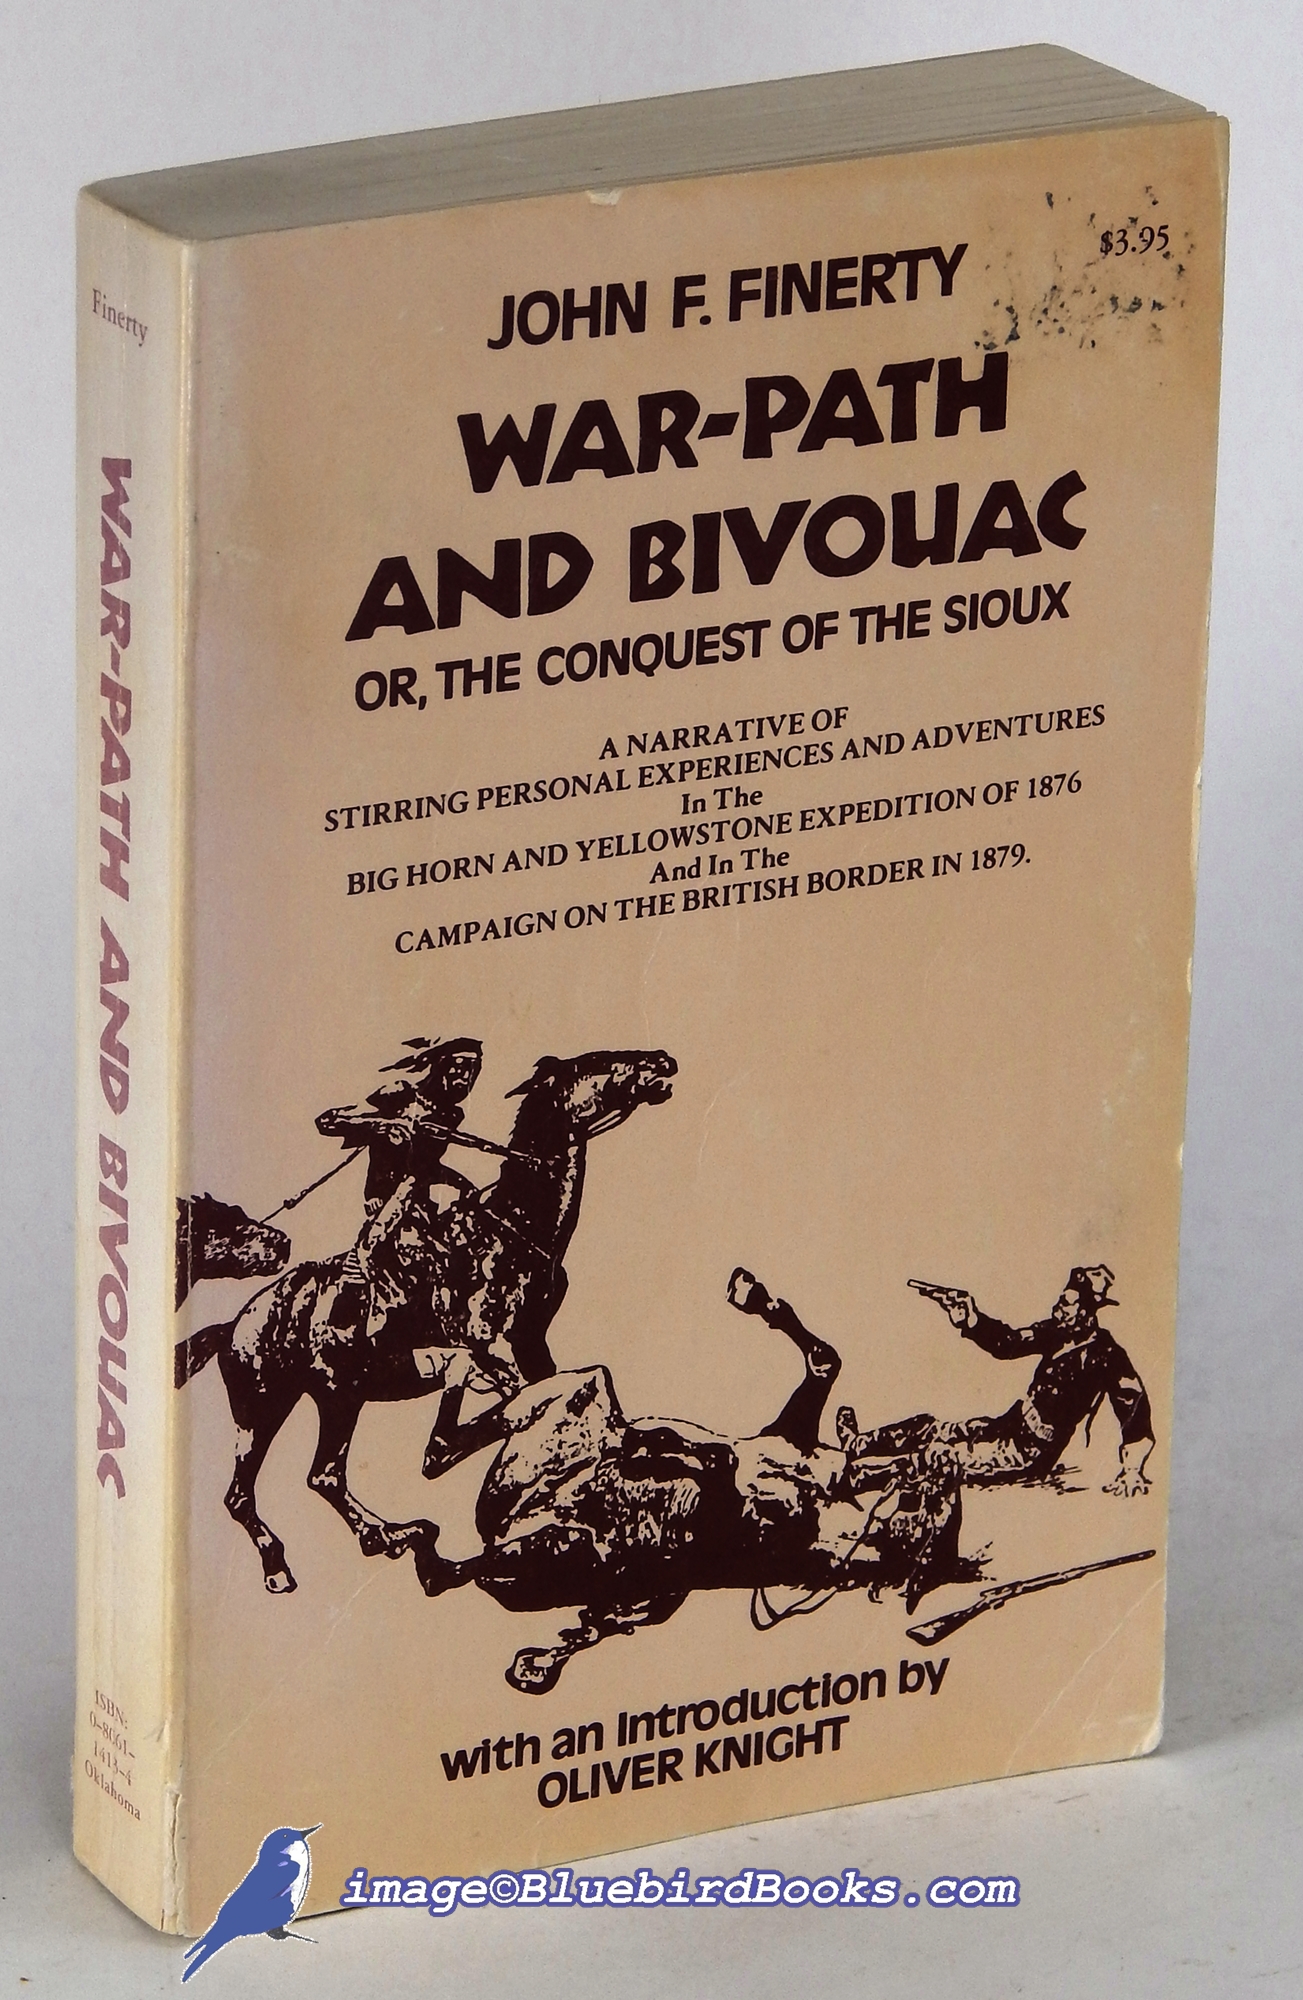 FINERTY, JOHN F. - War-Path and Bivouac, or the Conquest of the Sioux